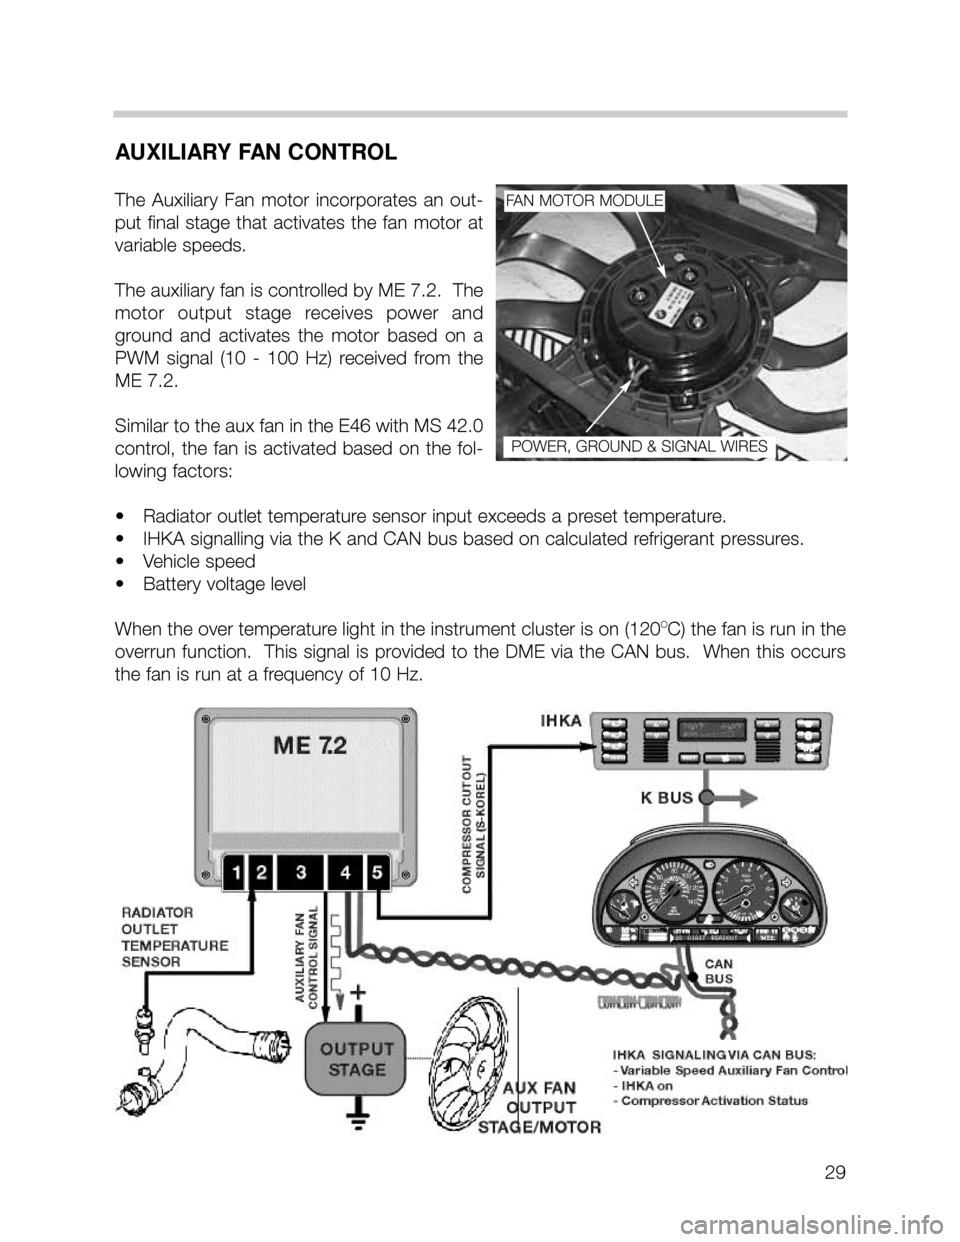 BMW X5 1999 E53 M62TU Engine Owners Manual 29
AUXILIARY FAN CONTROL
The  Auxiliary  Fan  motor  incorporates  an  out-
put  final  stage  that  activates  the  fan  motor  at
variable speeds.  
The auxiliary fan is controlled by ME 7.2.  The
m